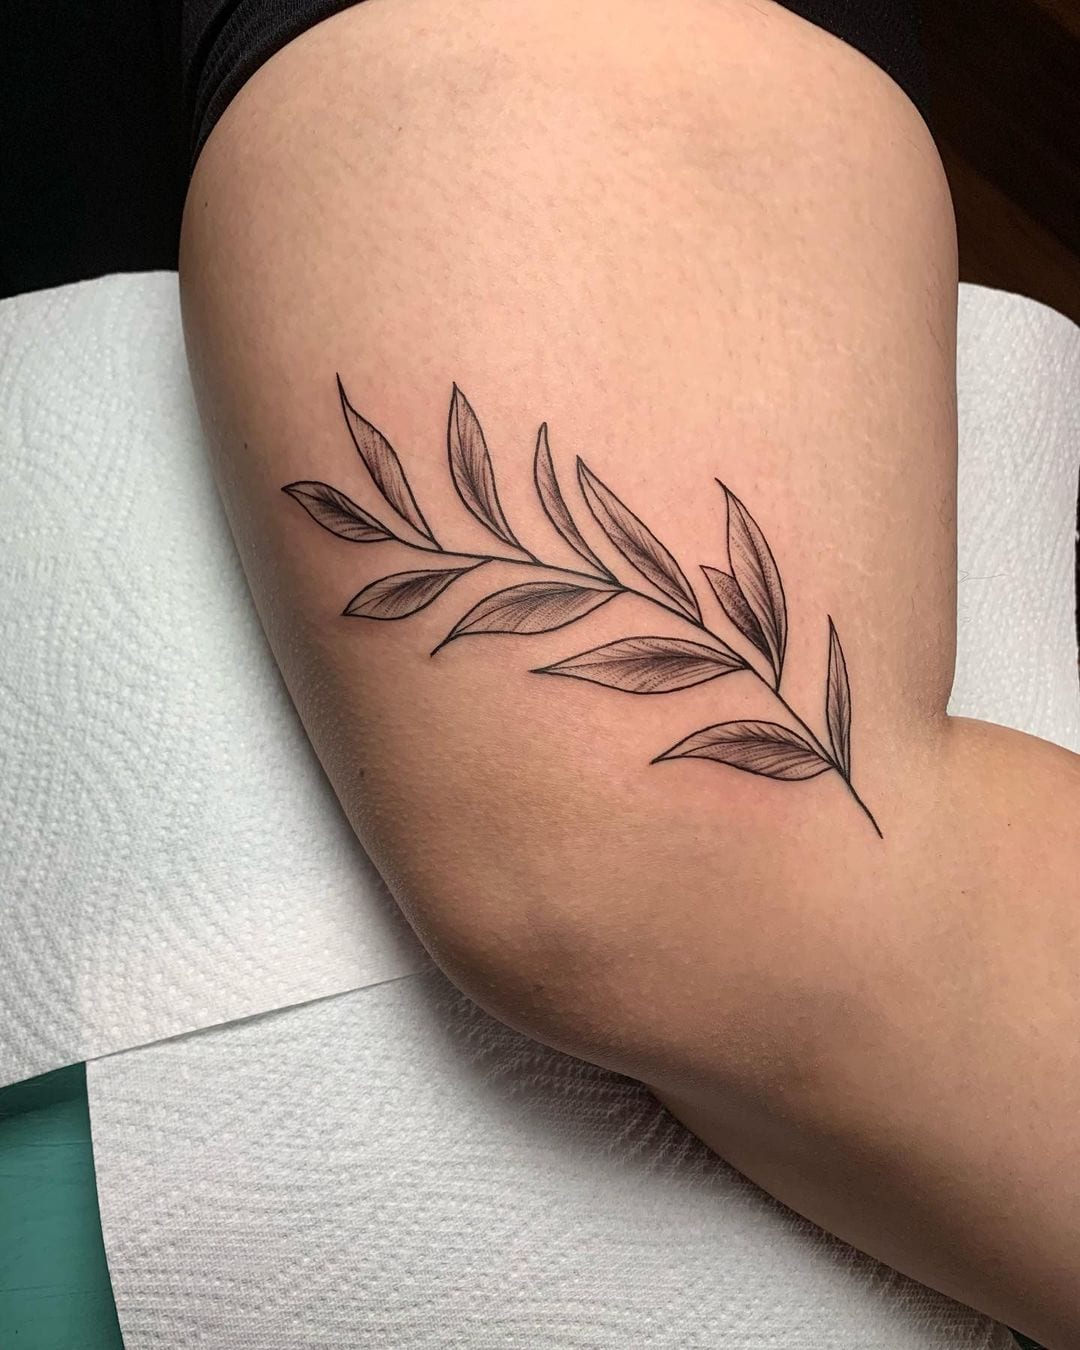 The 7 Best Vine Flower Tattoos Designs for Your Next Tattoo